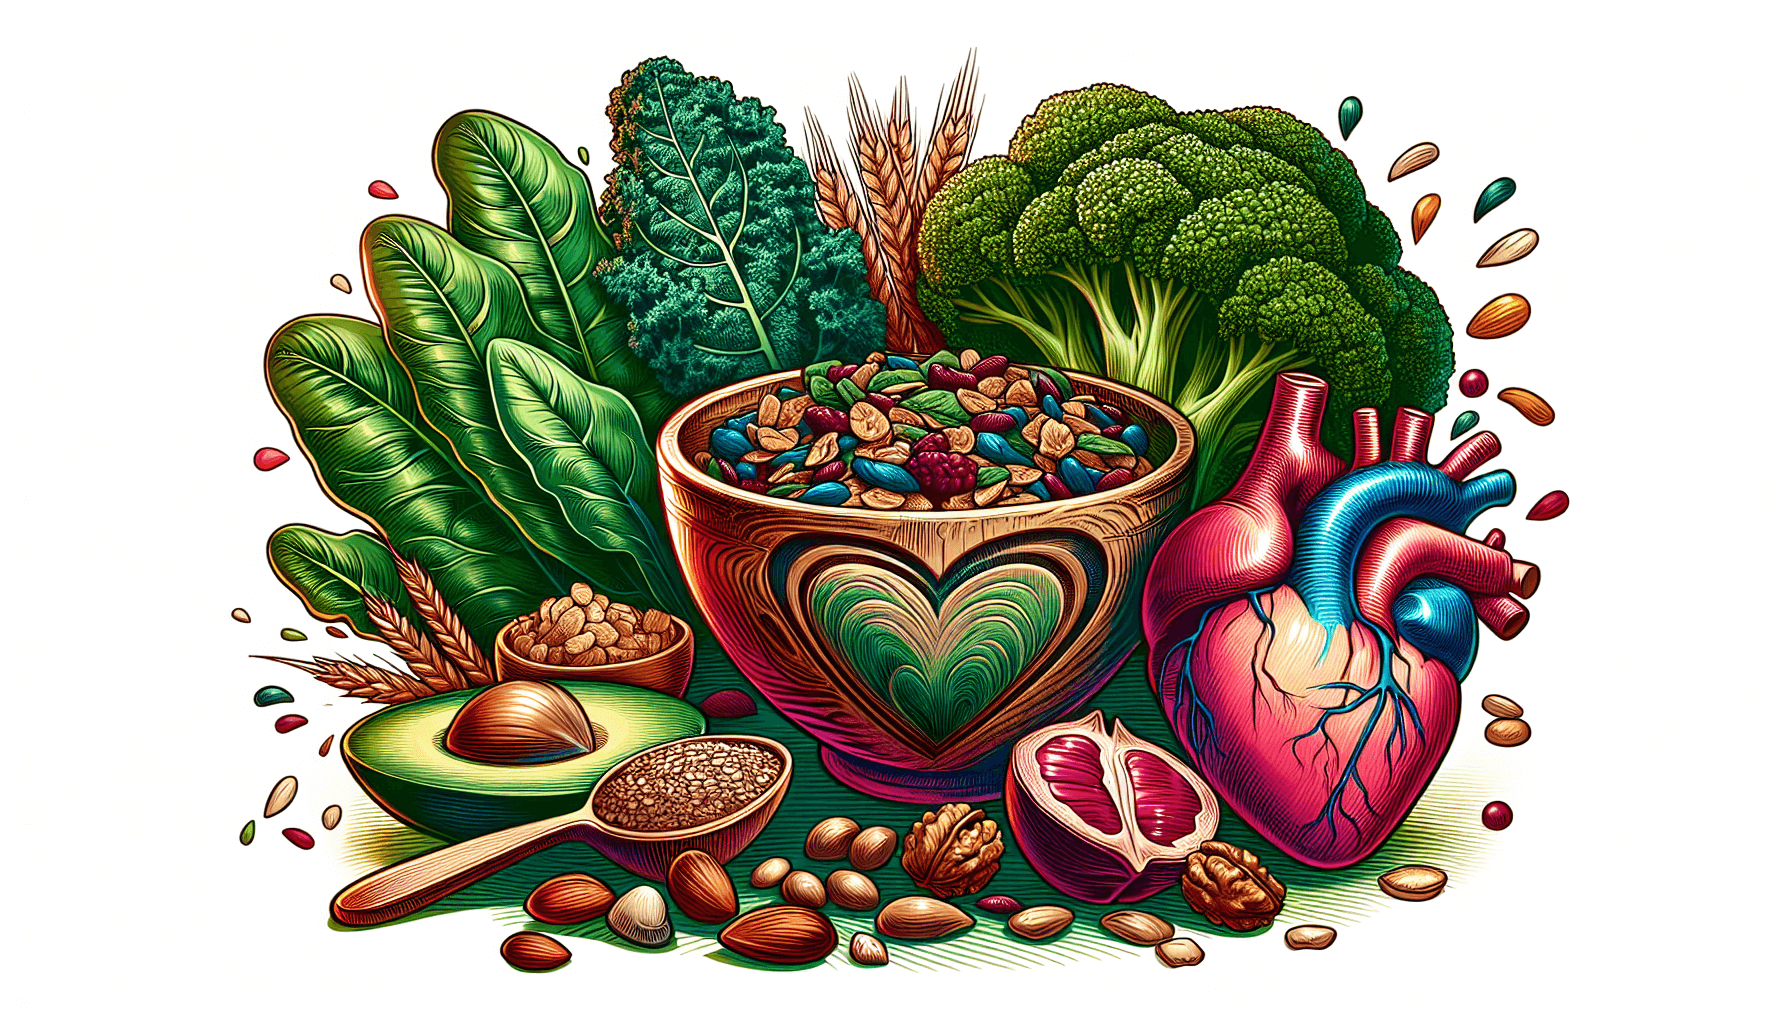 Illustration of a nutrient-rich diet for cardiovascular wellness